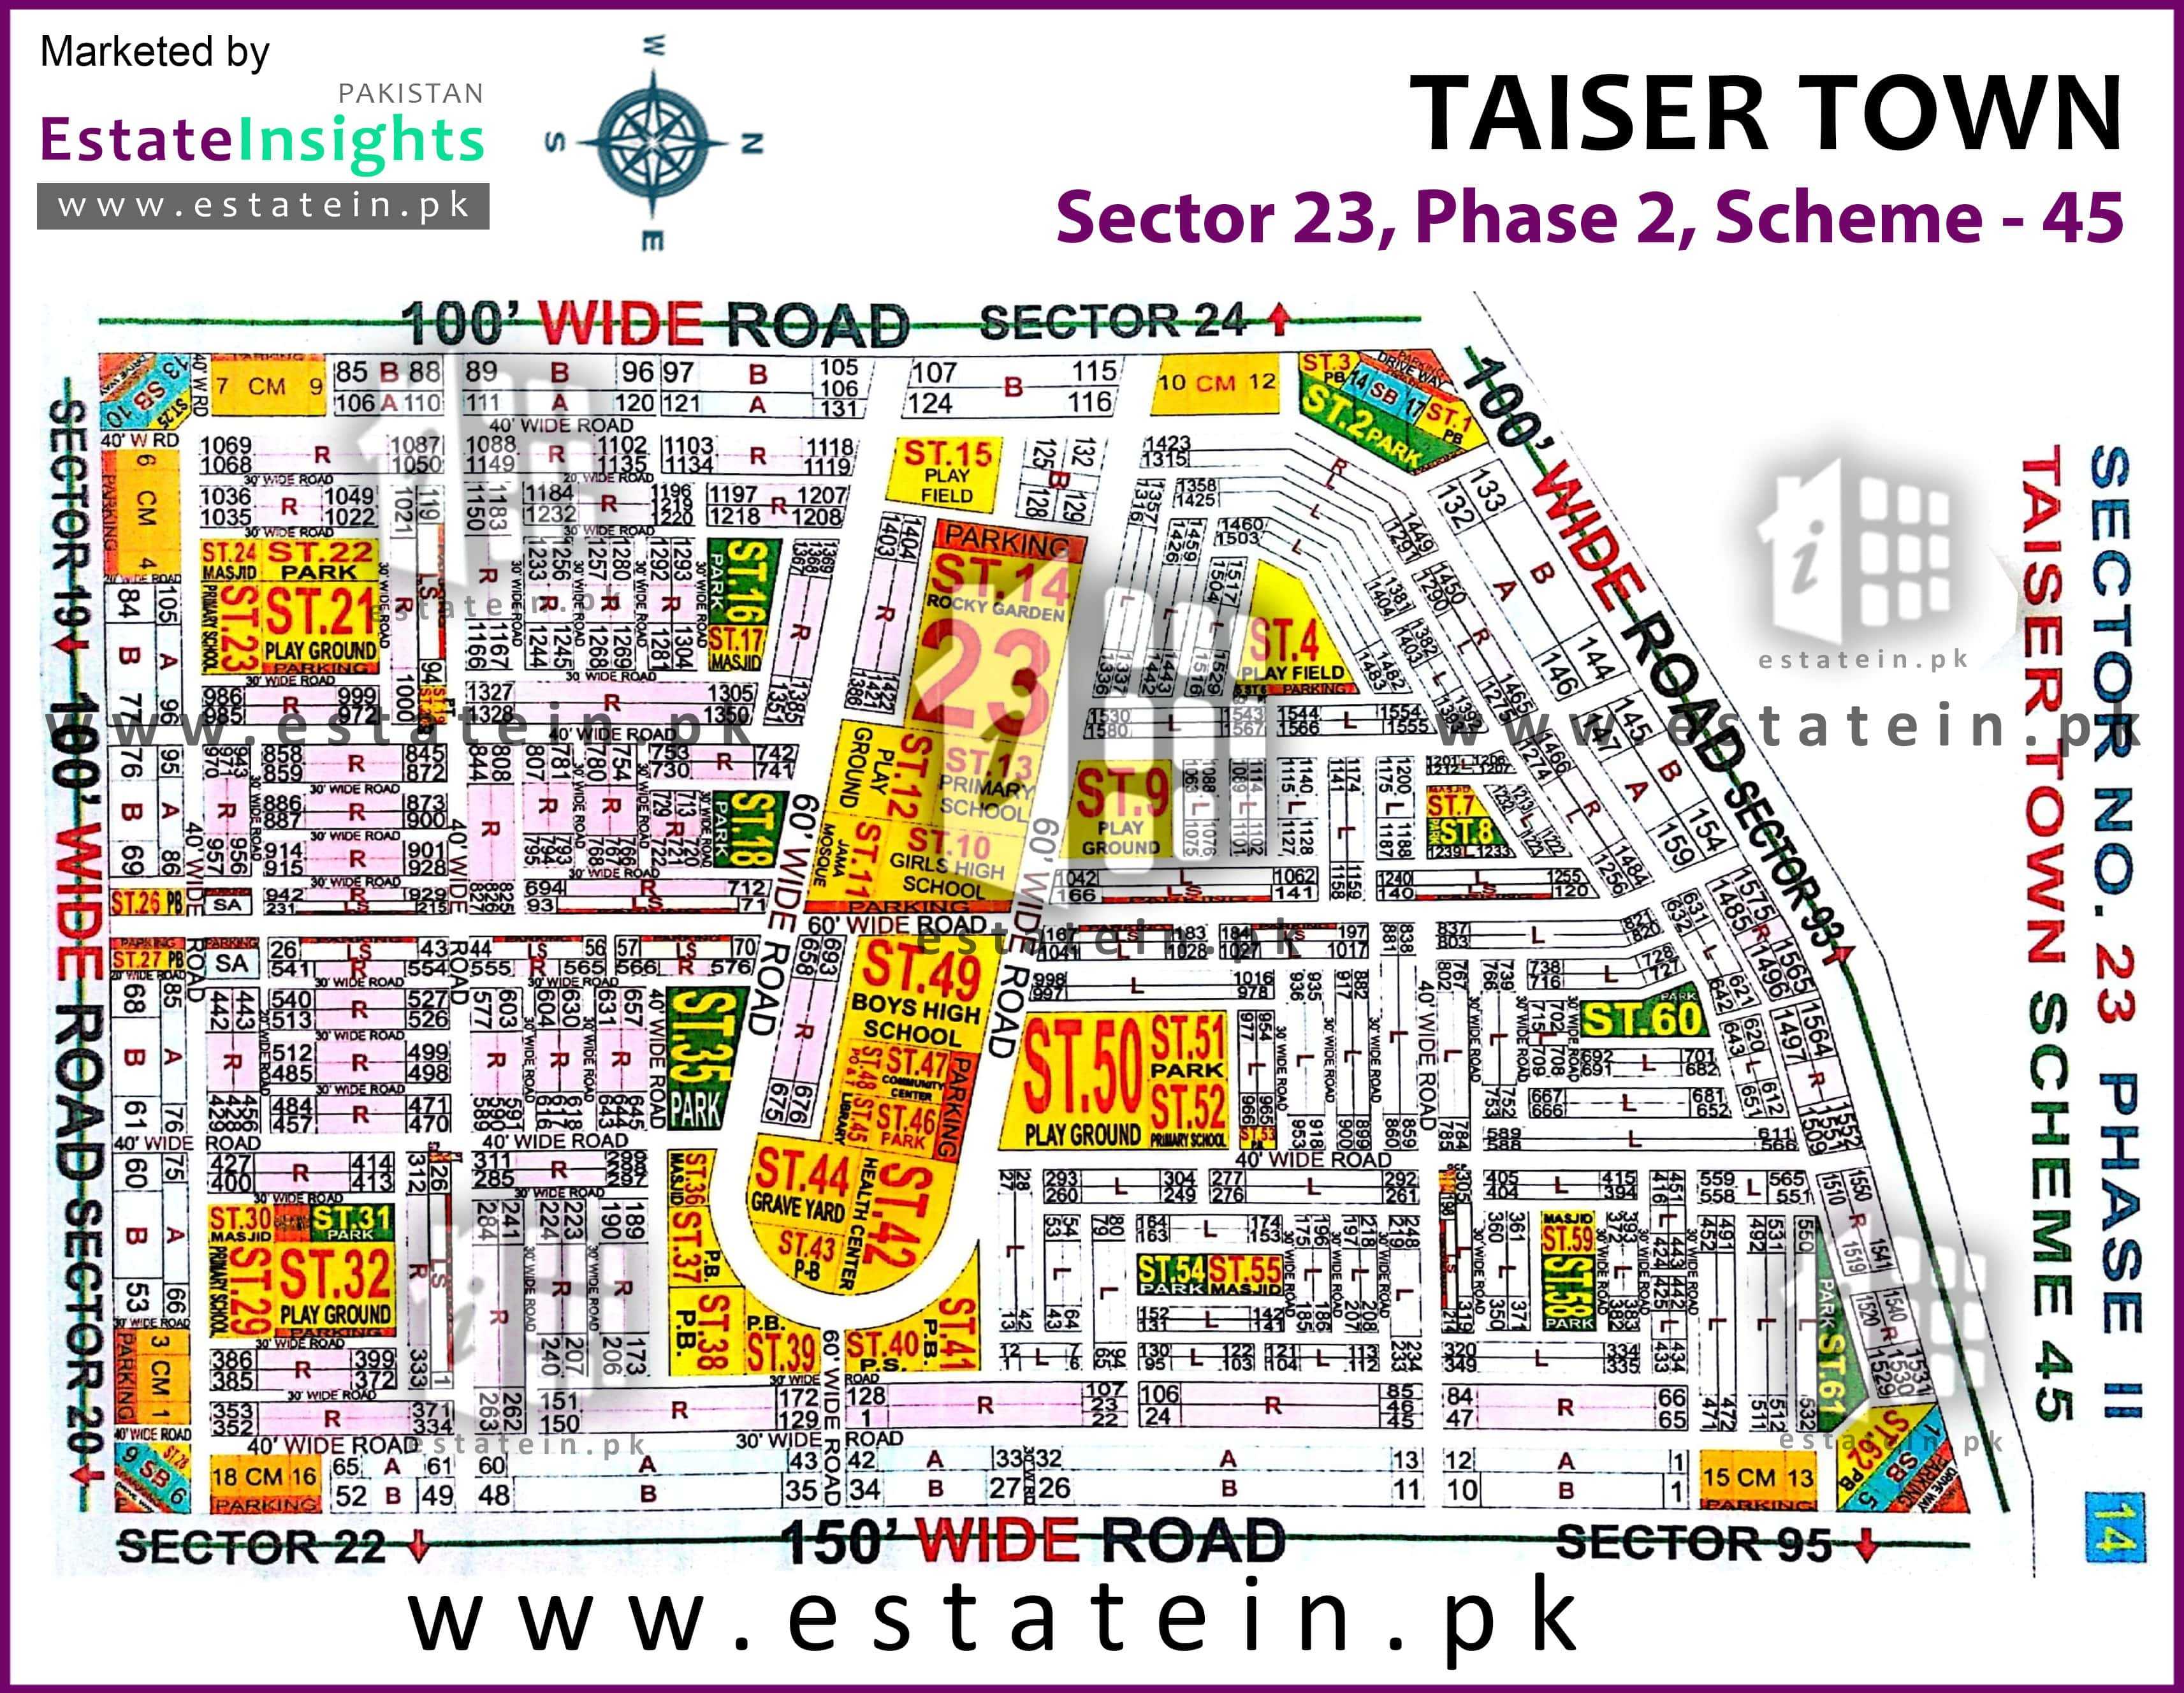 Site Plan of Sector 23 of Taiser Town Phase II